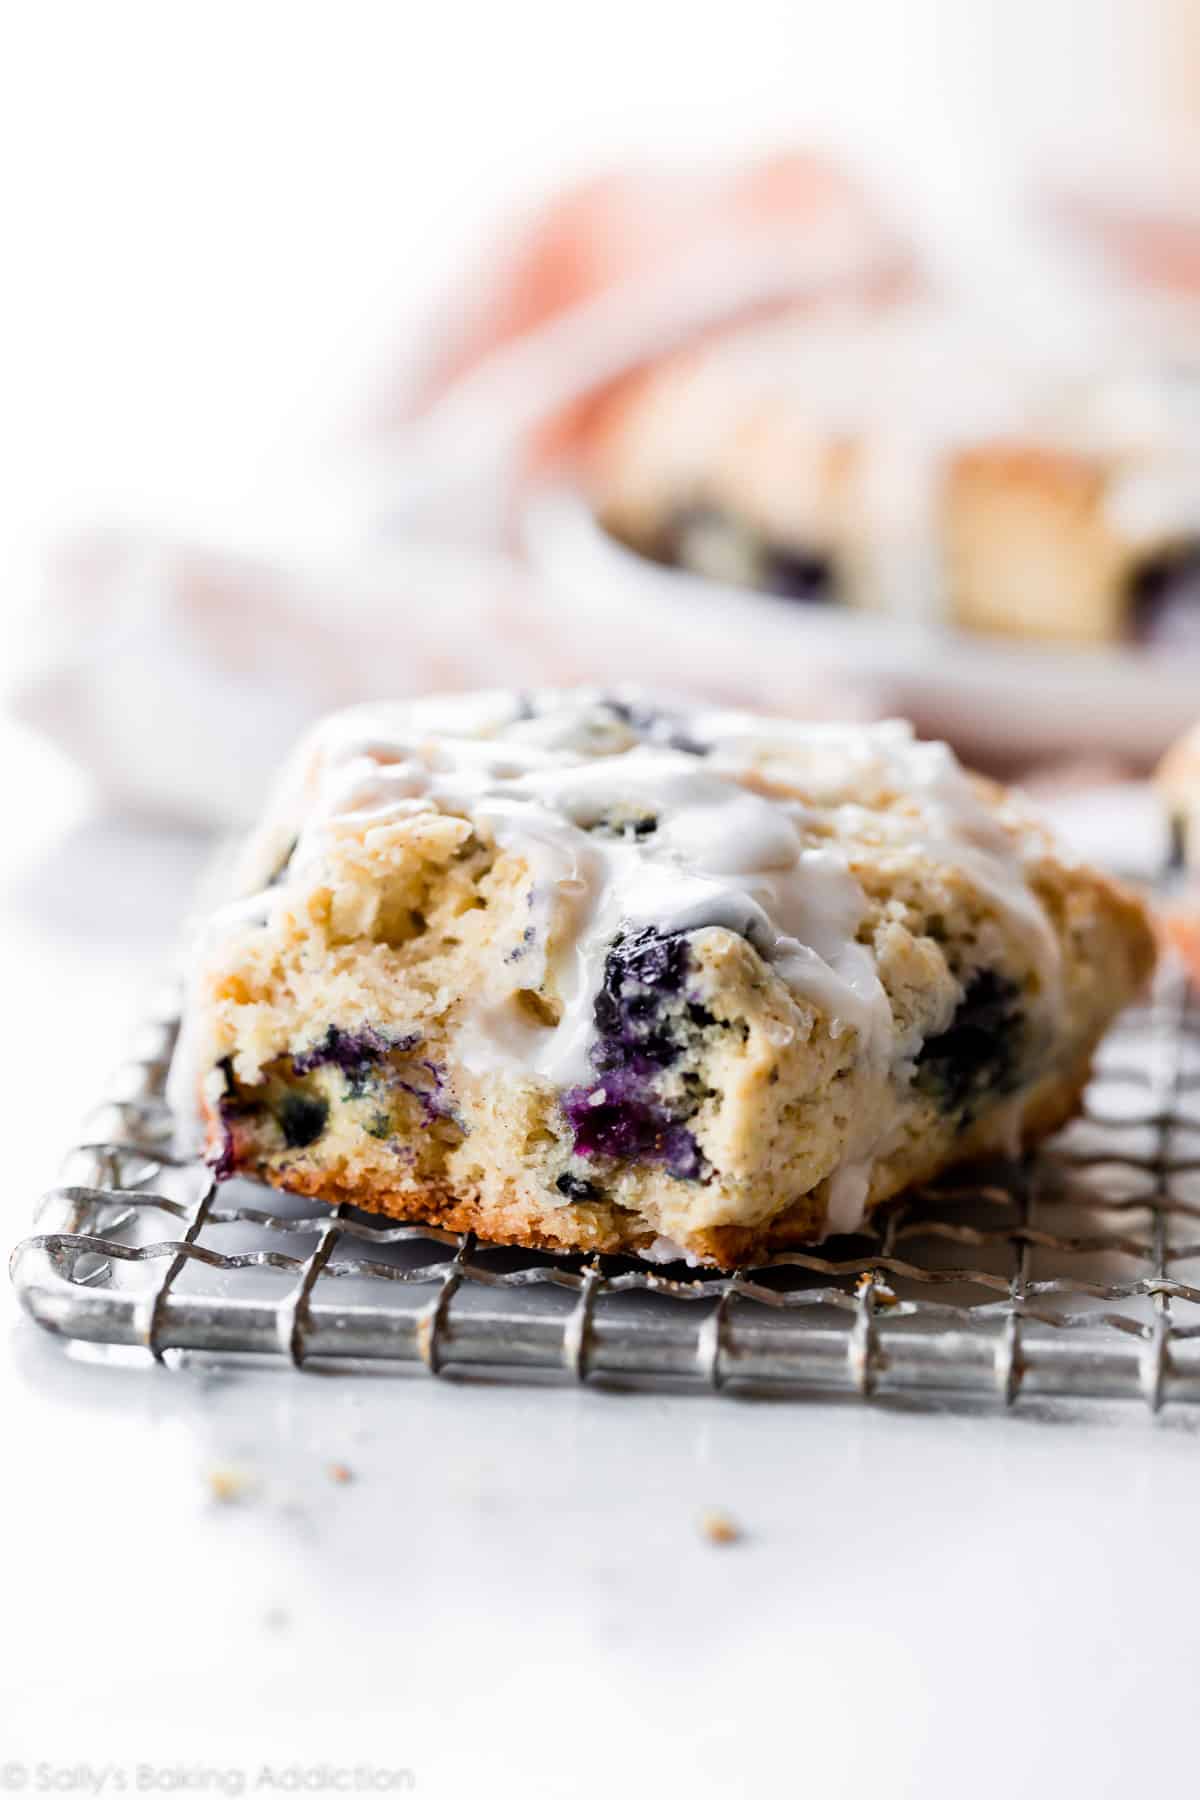 Blueberry scone with a bite taken from it